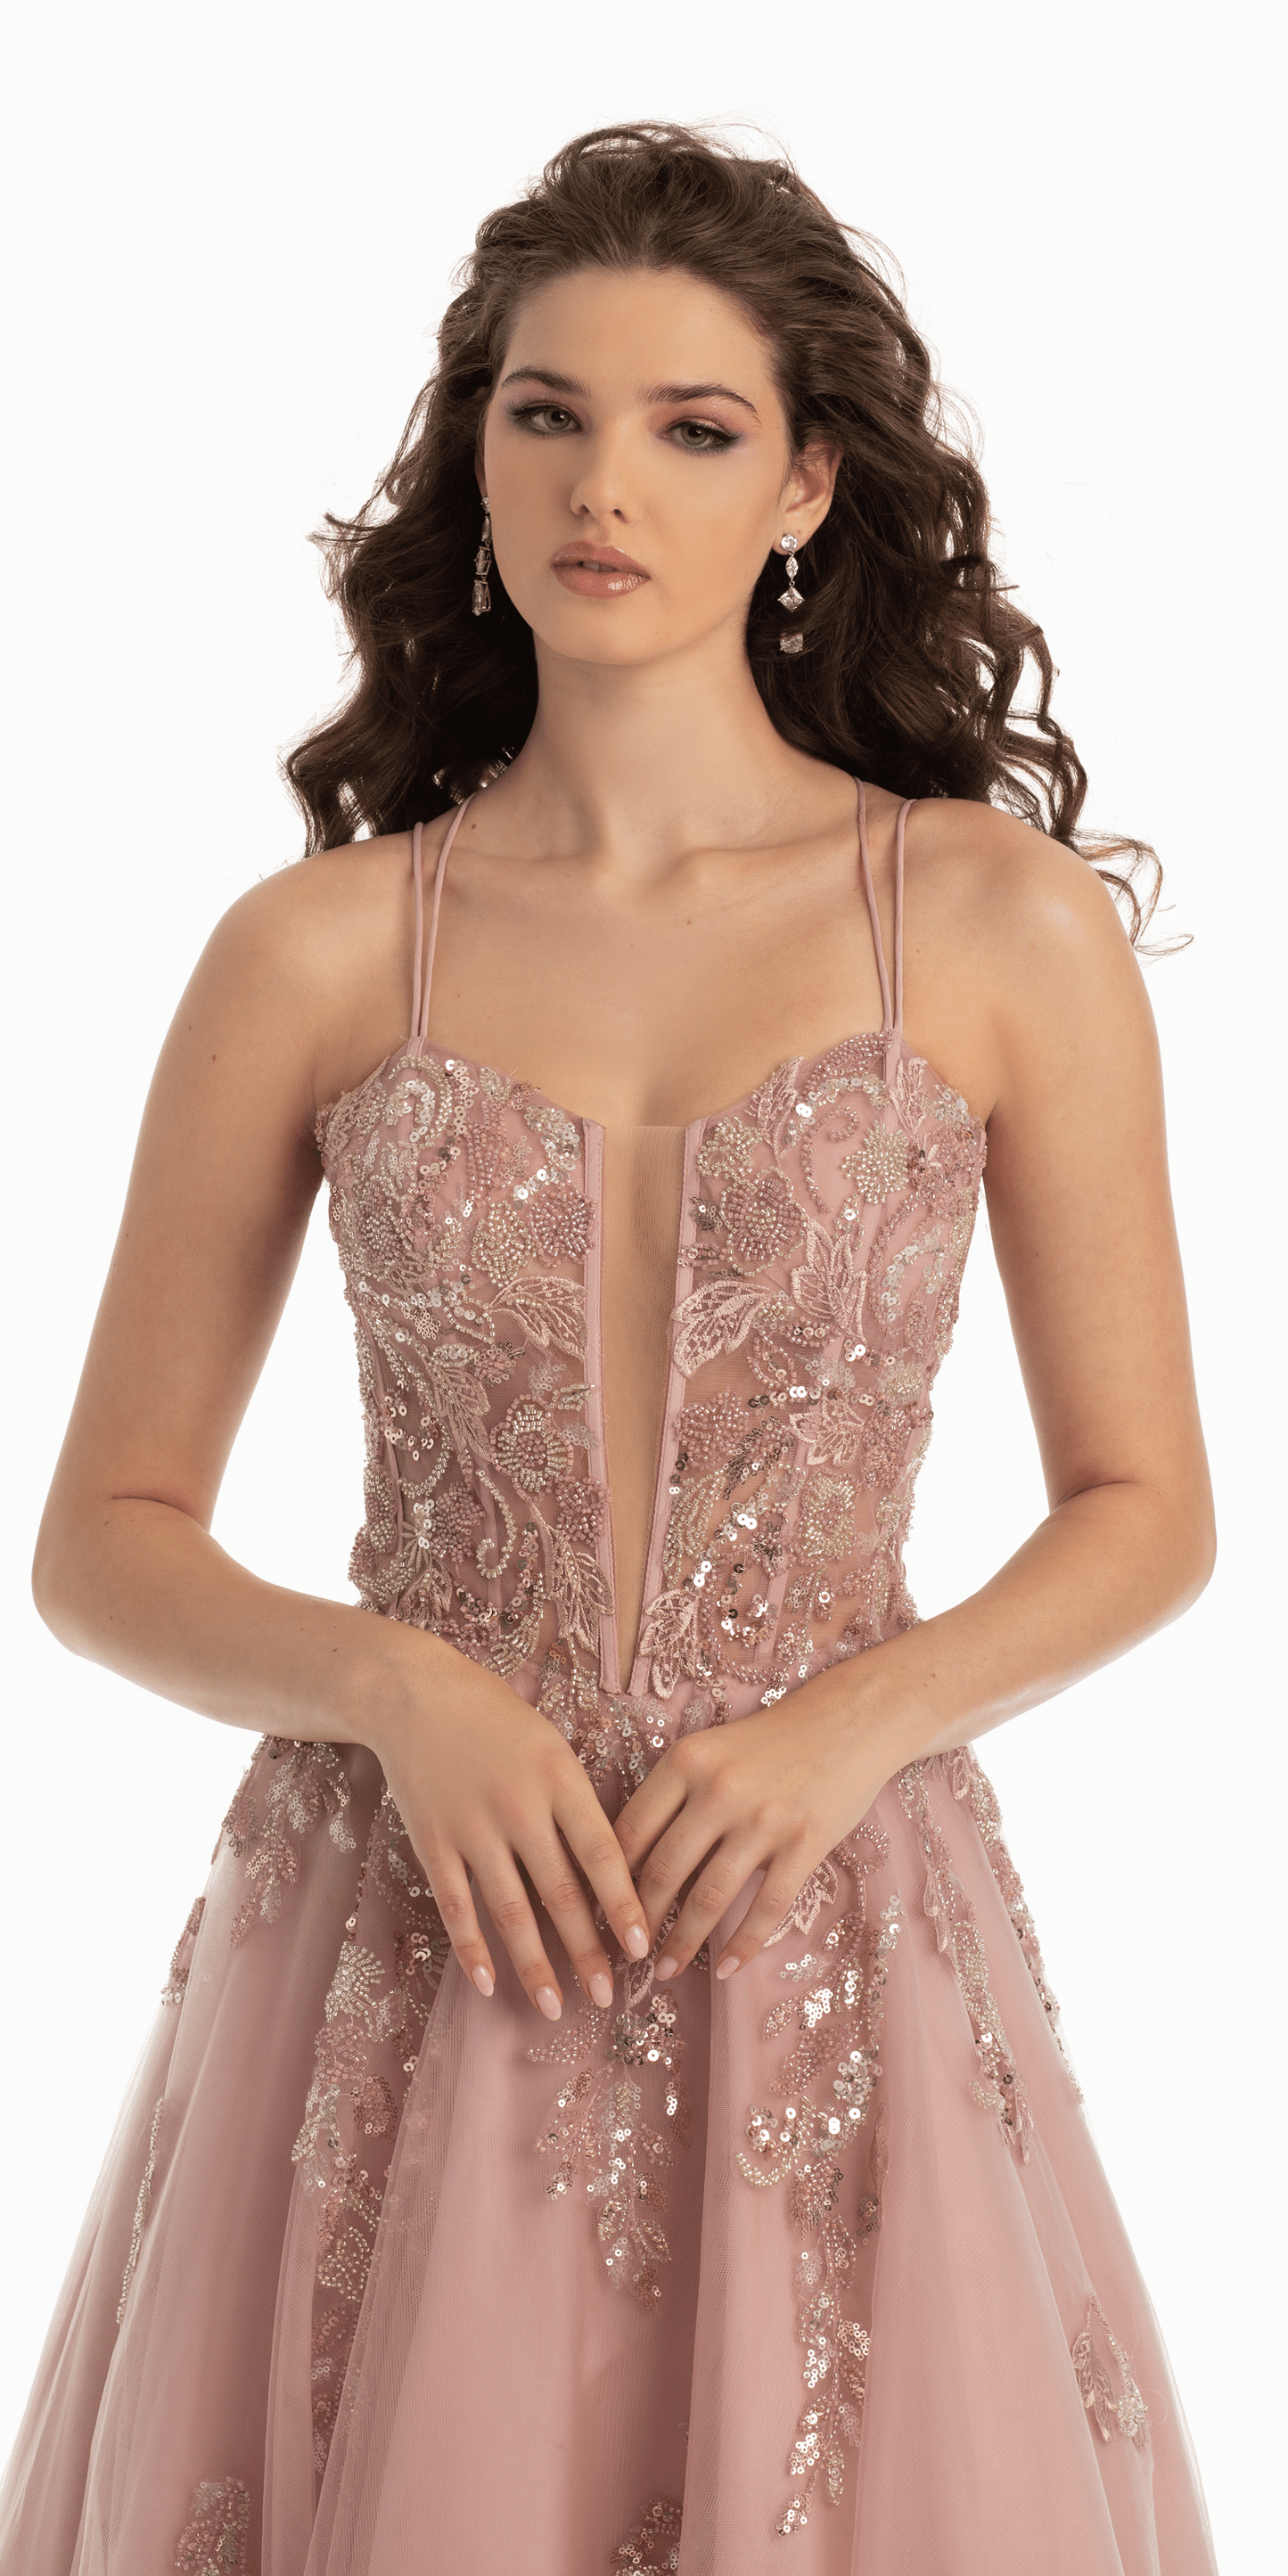 Camille La Vie Strappy Lace Up Back Sequin Plunge Tulle Ballgown